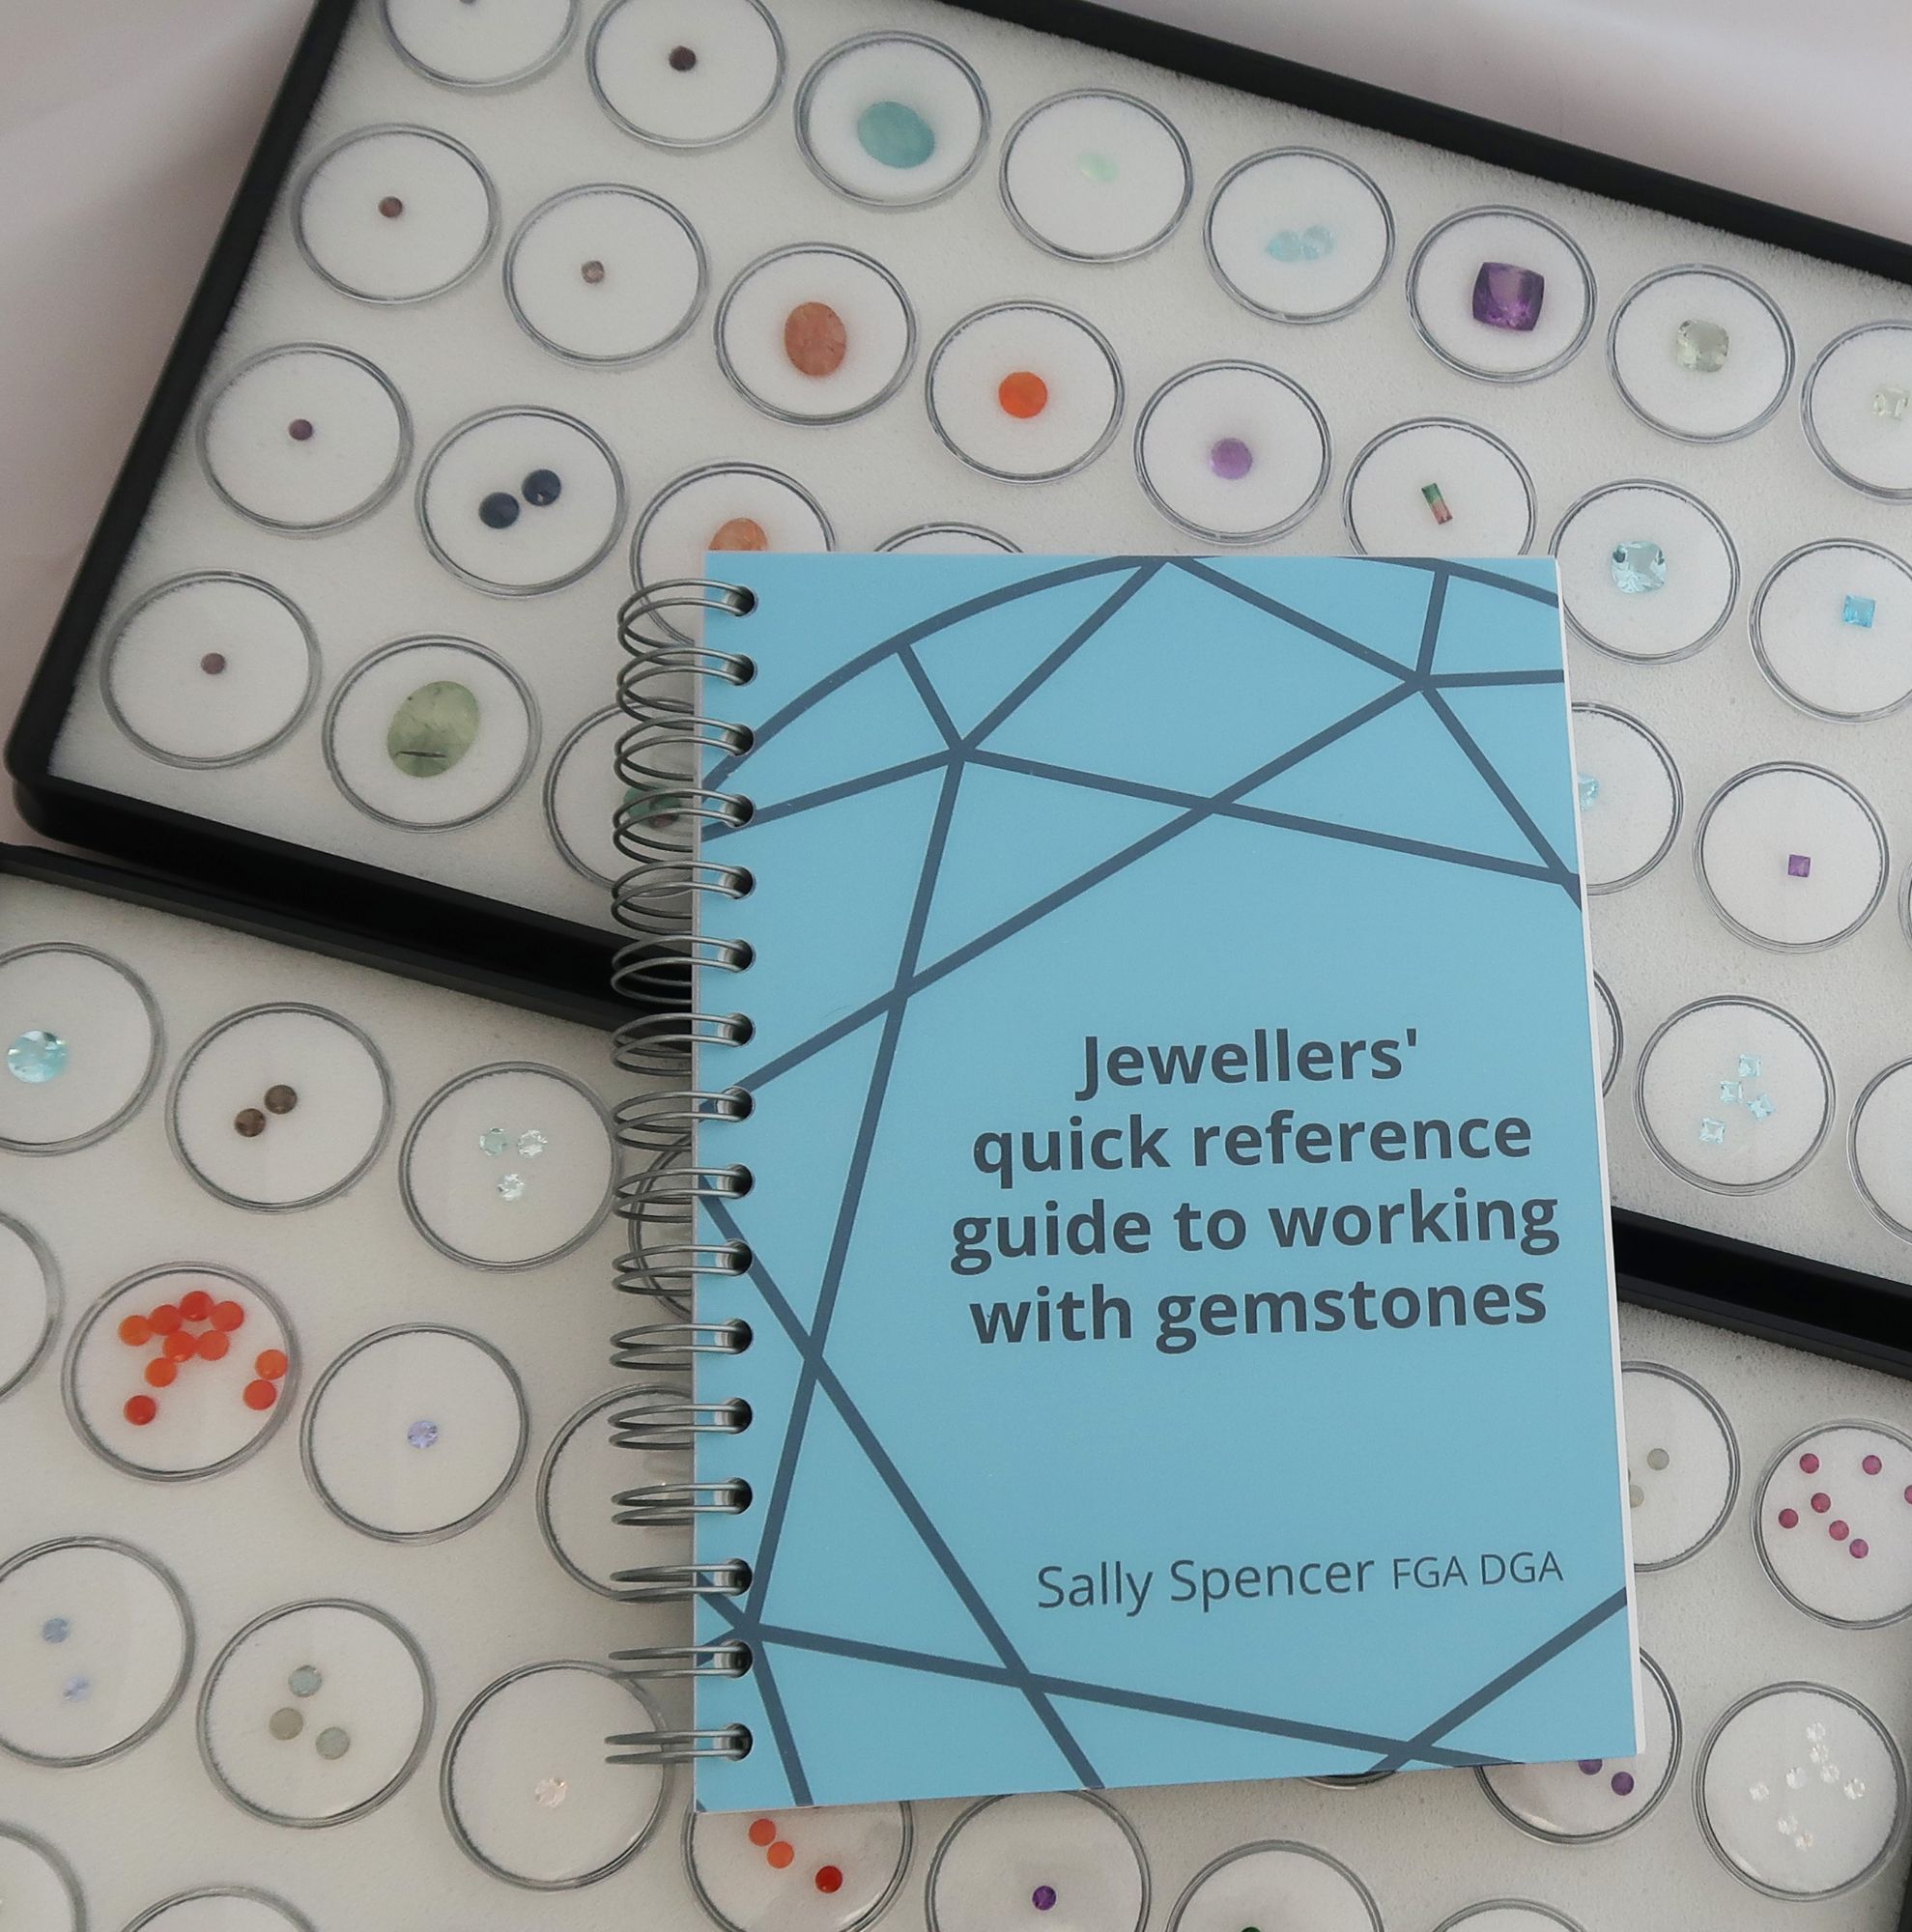 Jewellers' quick reference guide to working with gemstones